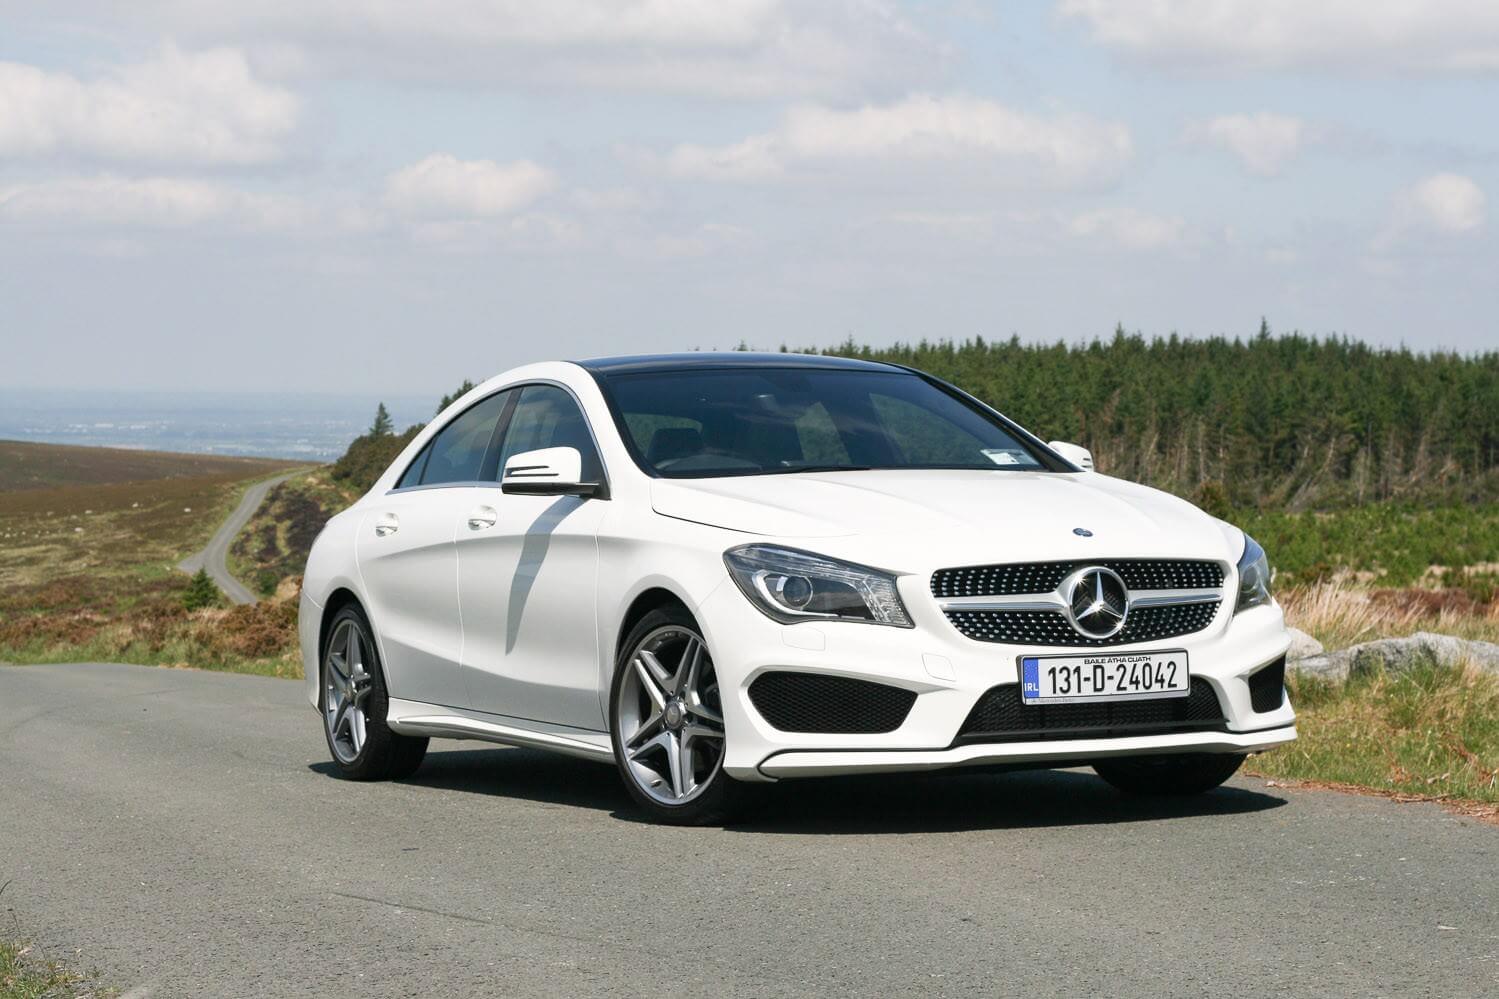 Mercedes-Benz CLA 220 CDI AMG Sport Review | Carzone New Car Review